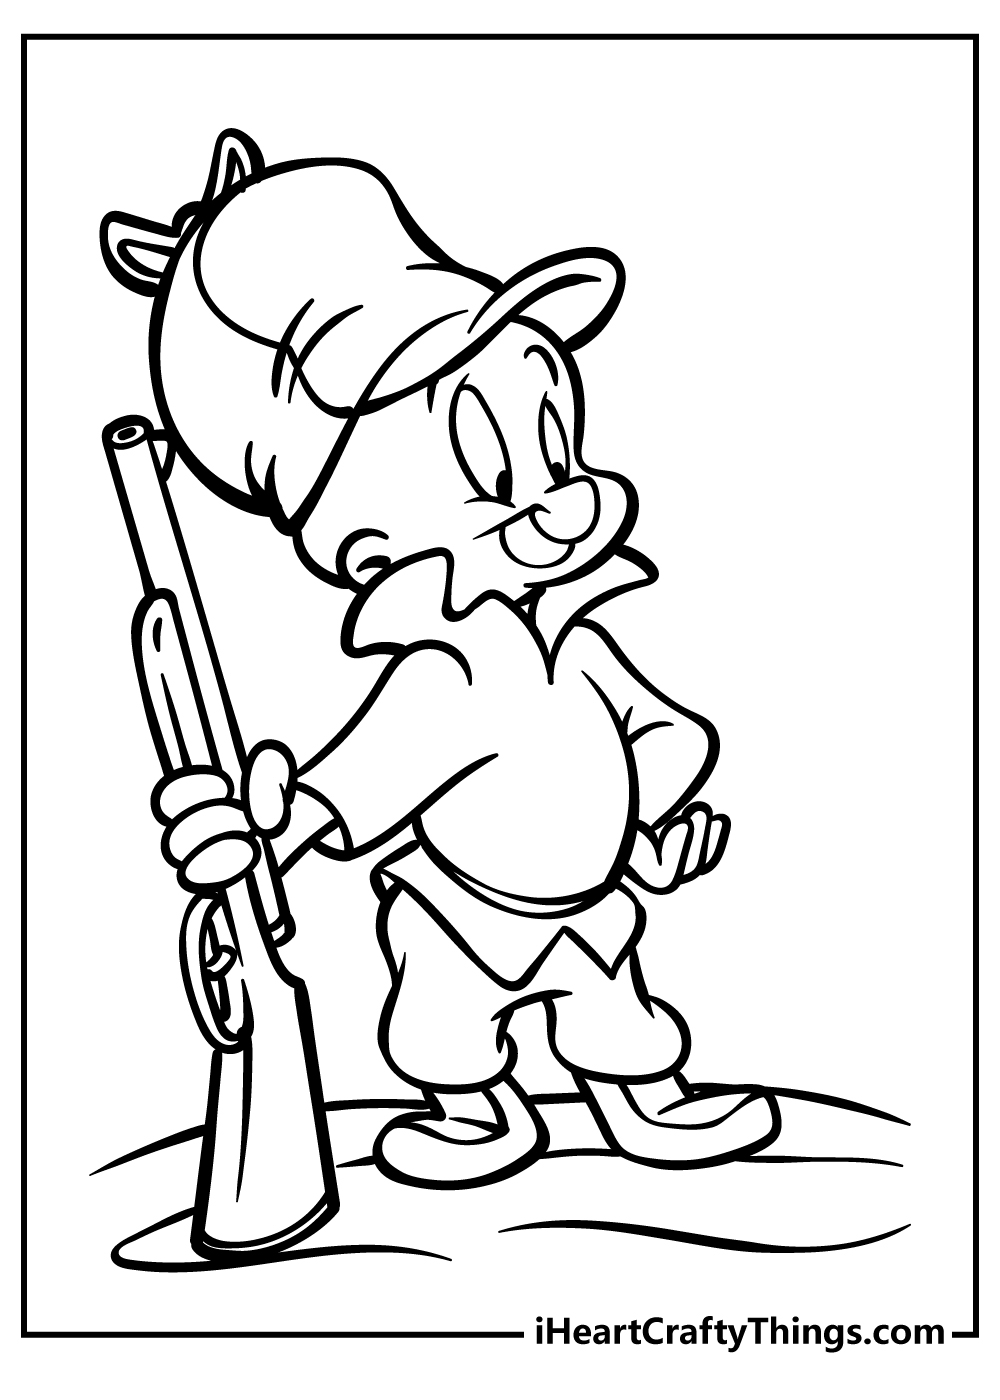 Looney Tunes Coloring Book for kids free printable